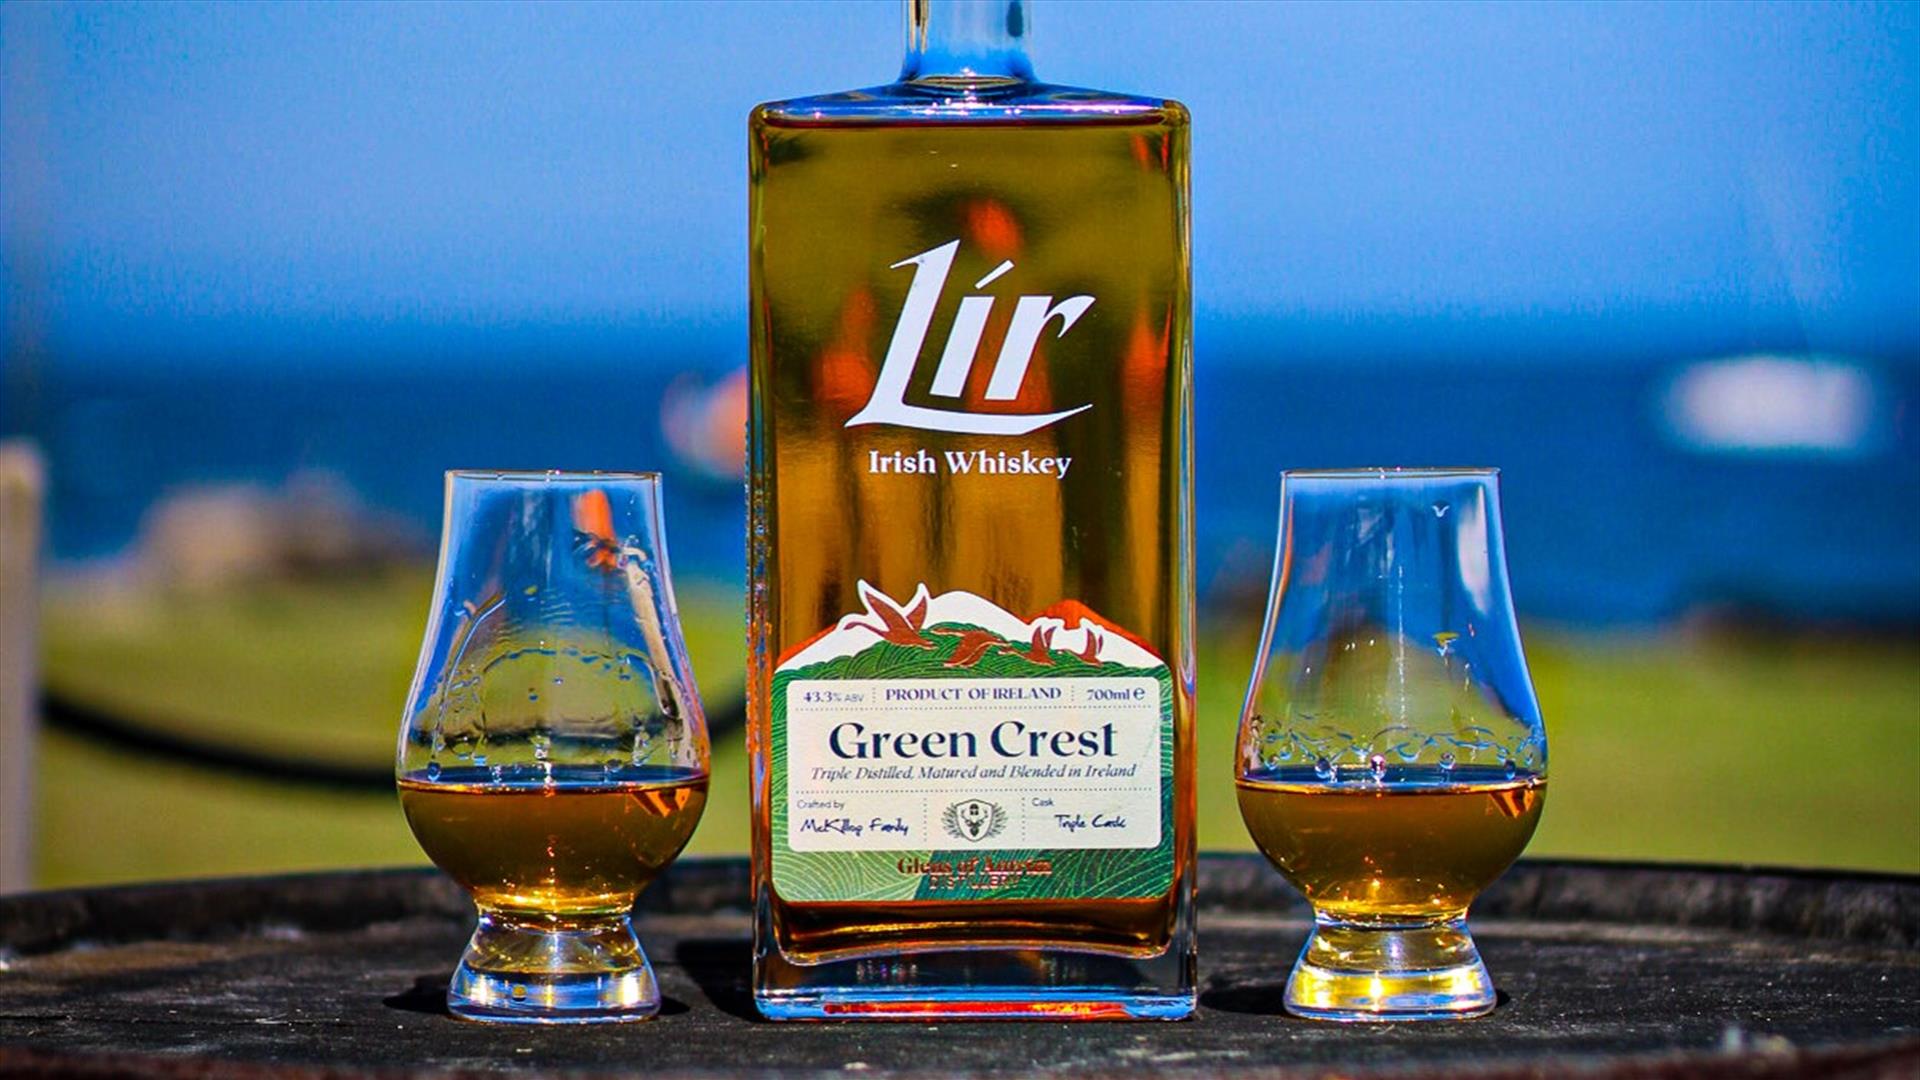 A bottle of Lir Irish Whiskey and 2 filled glasses sitting on a barrel